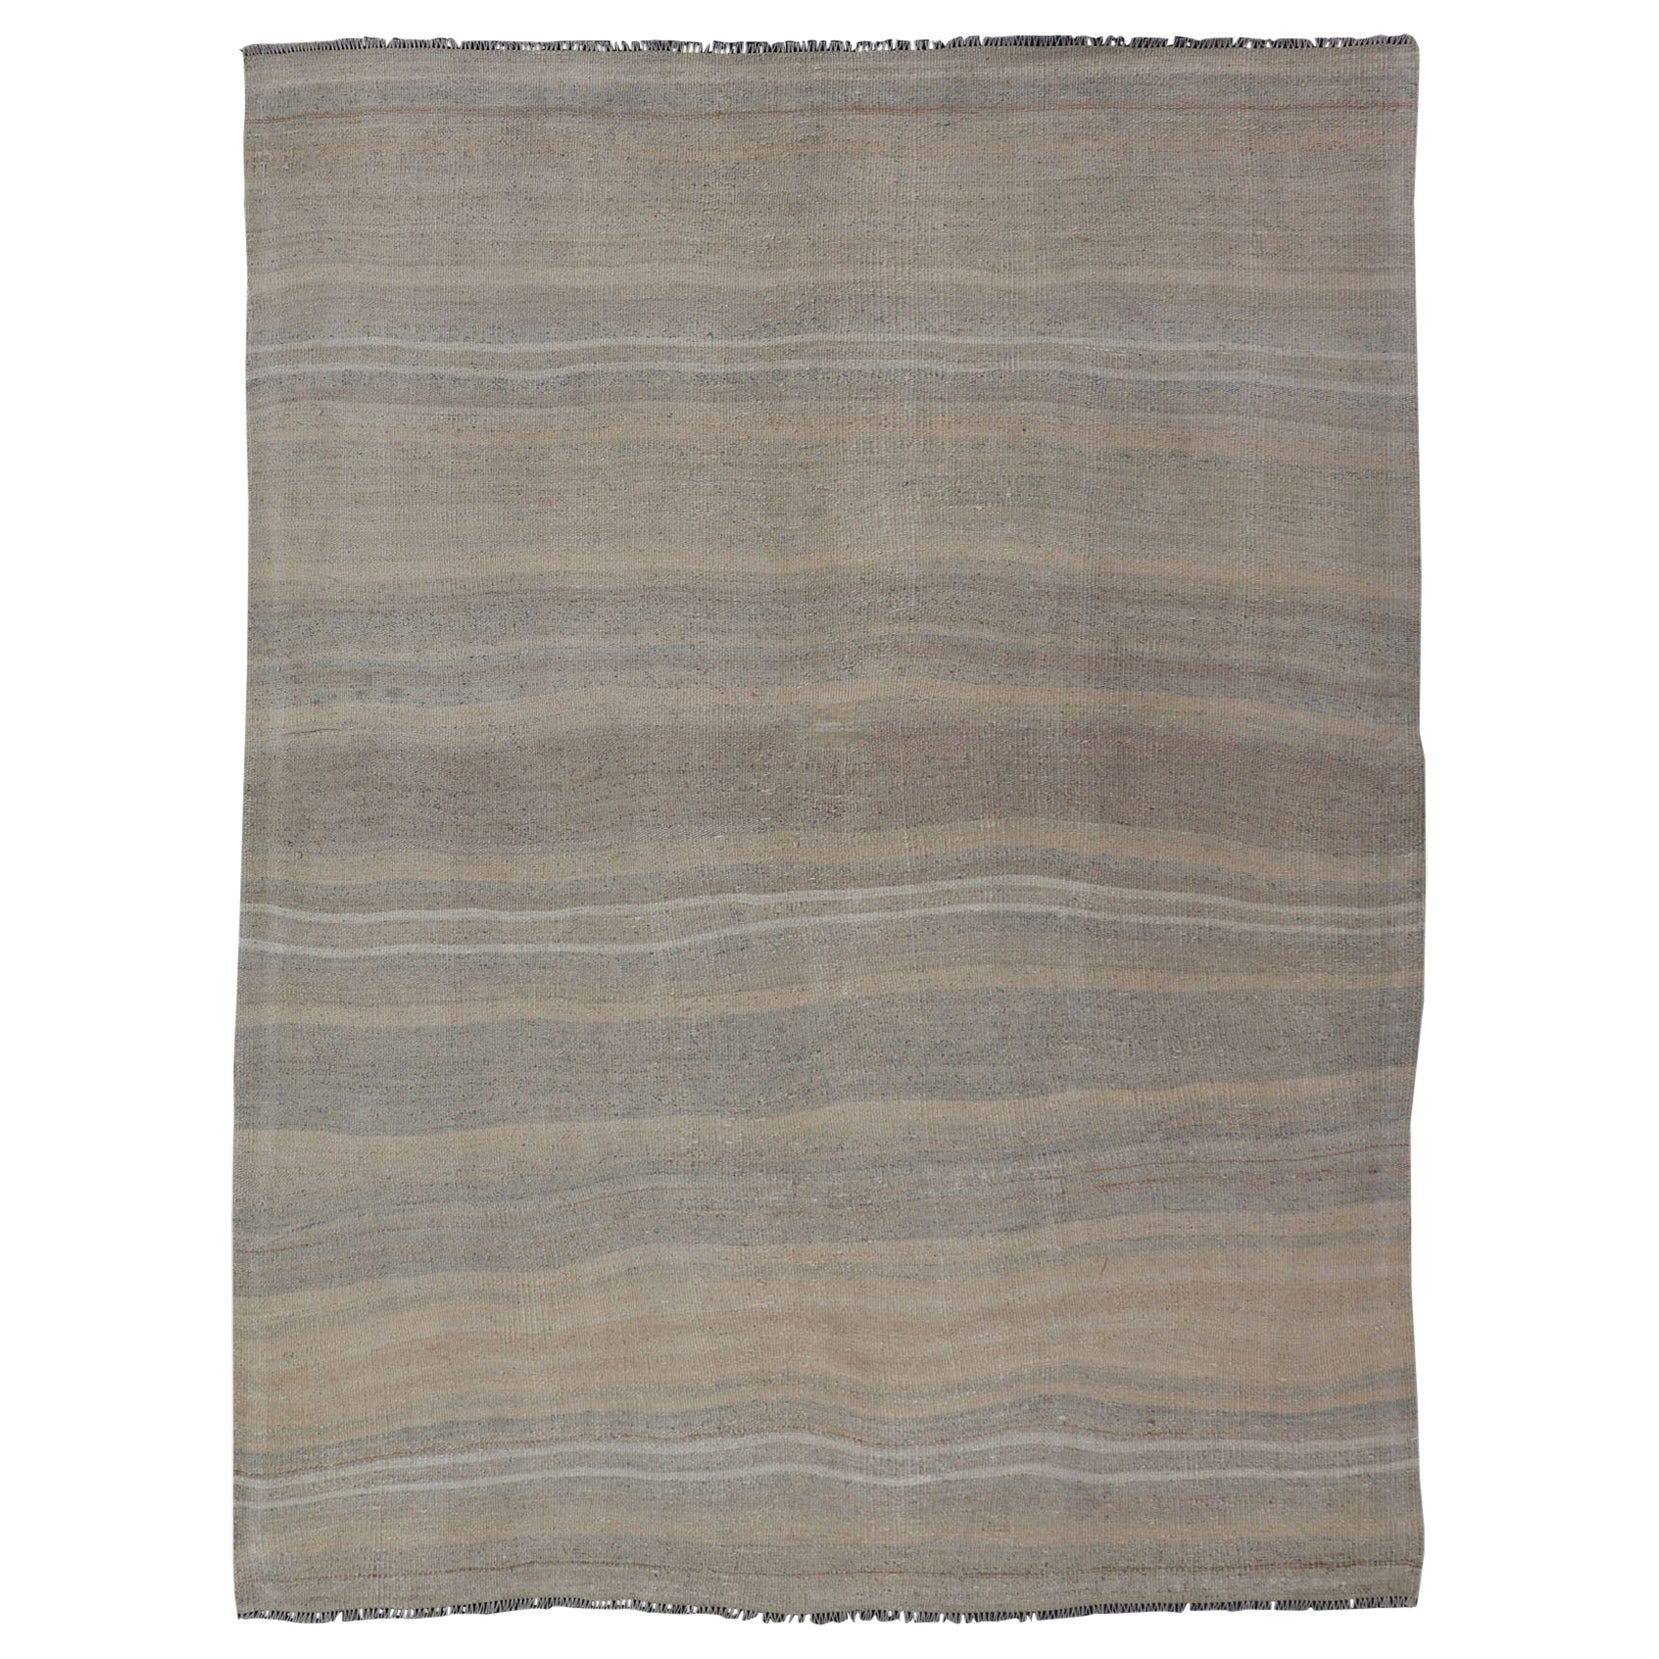 Vintage Turkish Kilim with Stripes in Gray, Tan, Taupe, and Cream For Sale